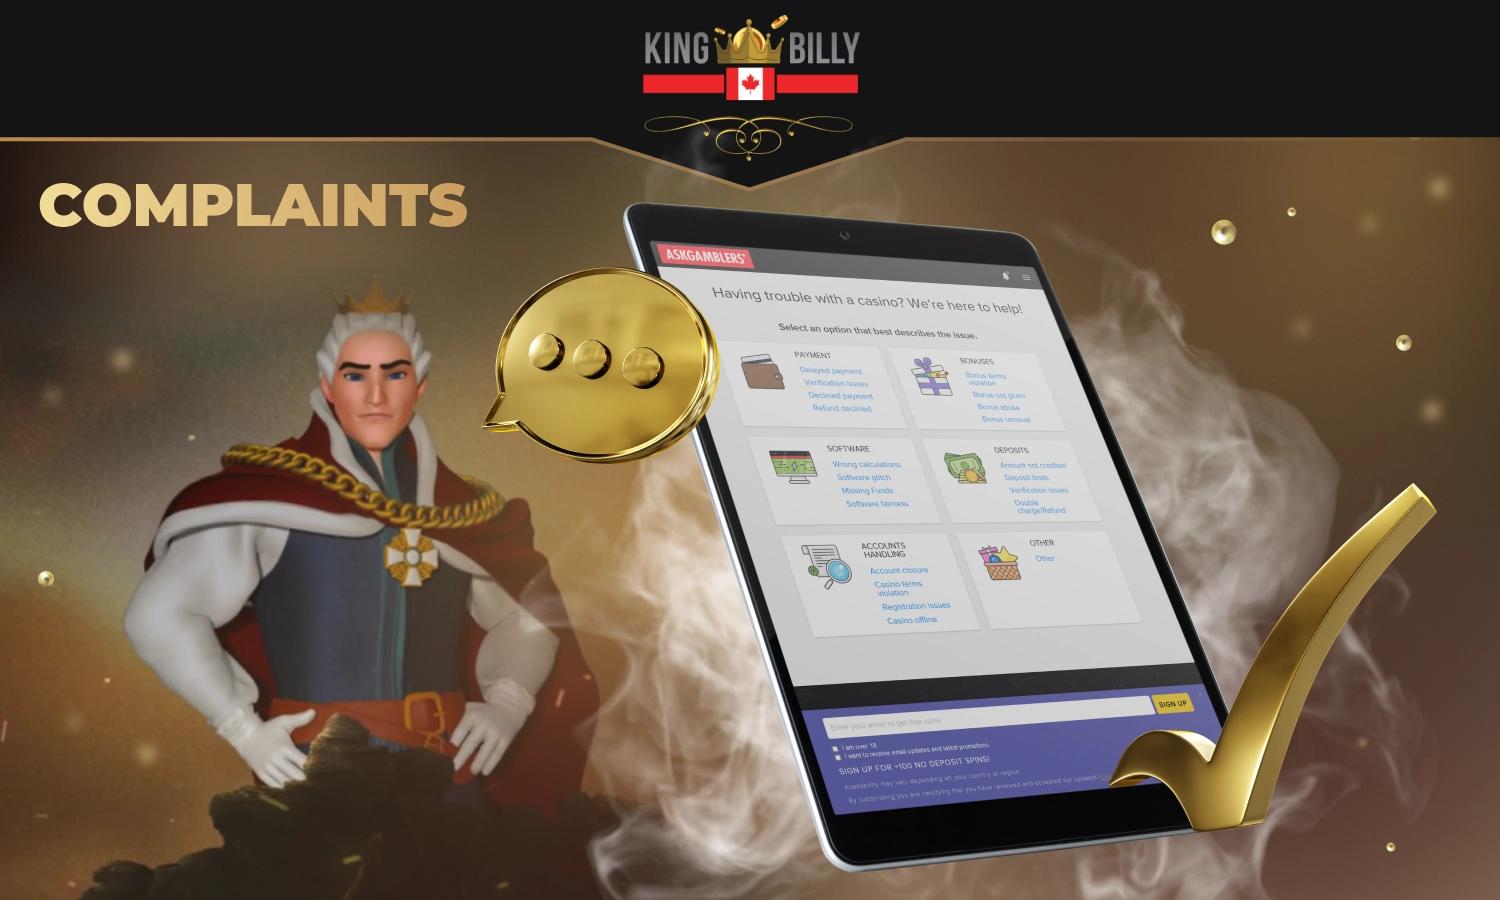 If players from Canada experience problems while playing on the King Billy website, they have the right to exercise their right to vote and complain to the ADR service provider